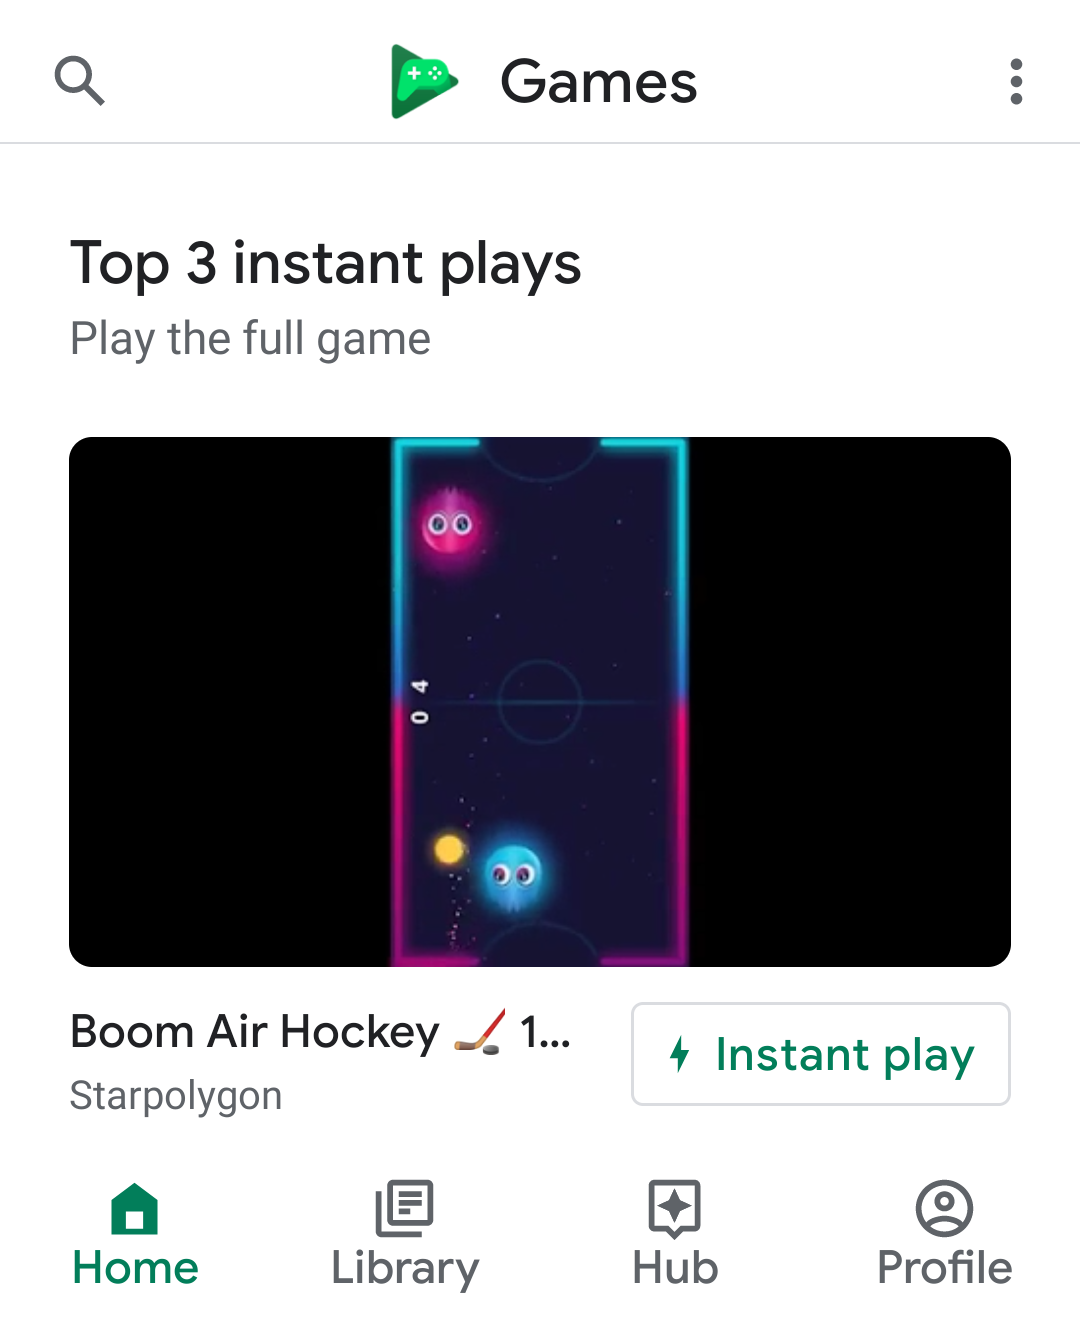 The 'Instant play' button appears in the Google Play Games app